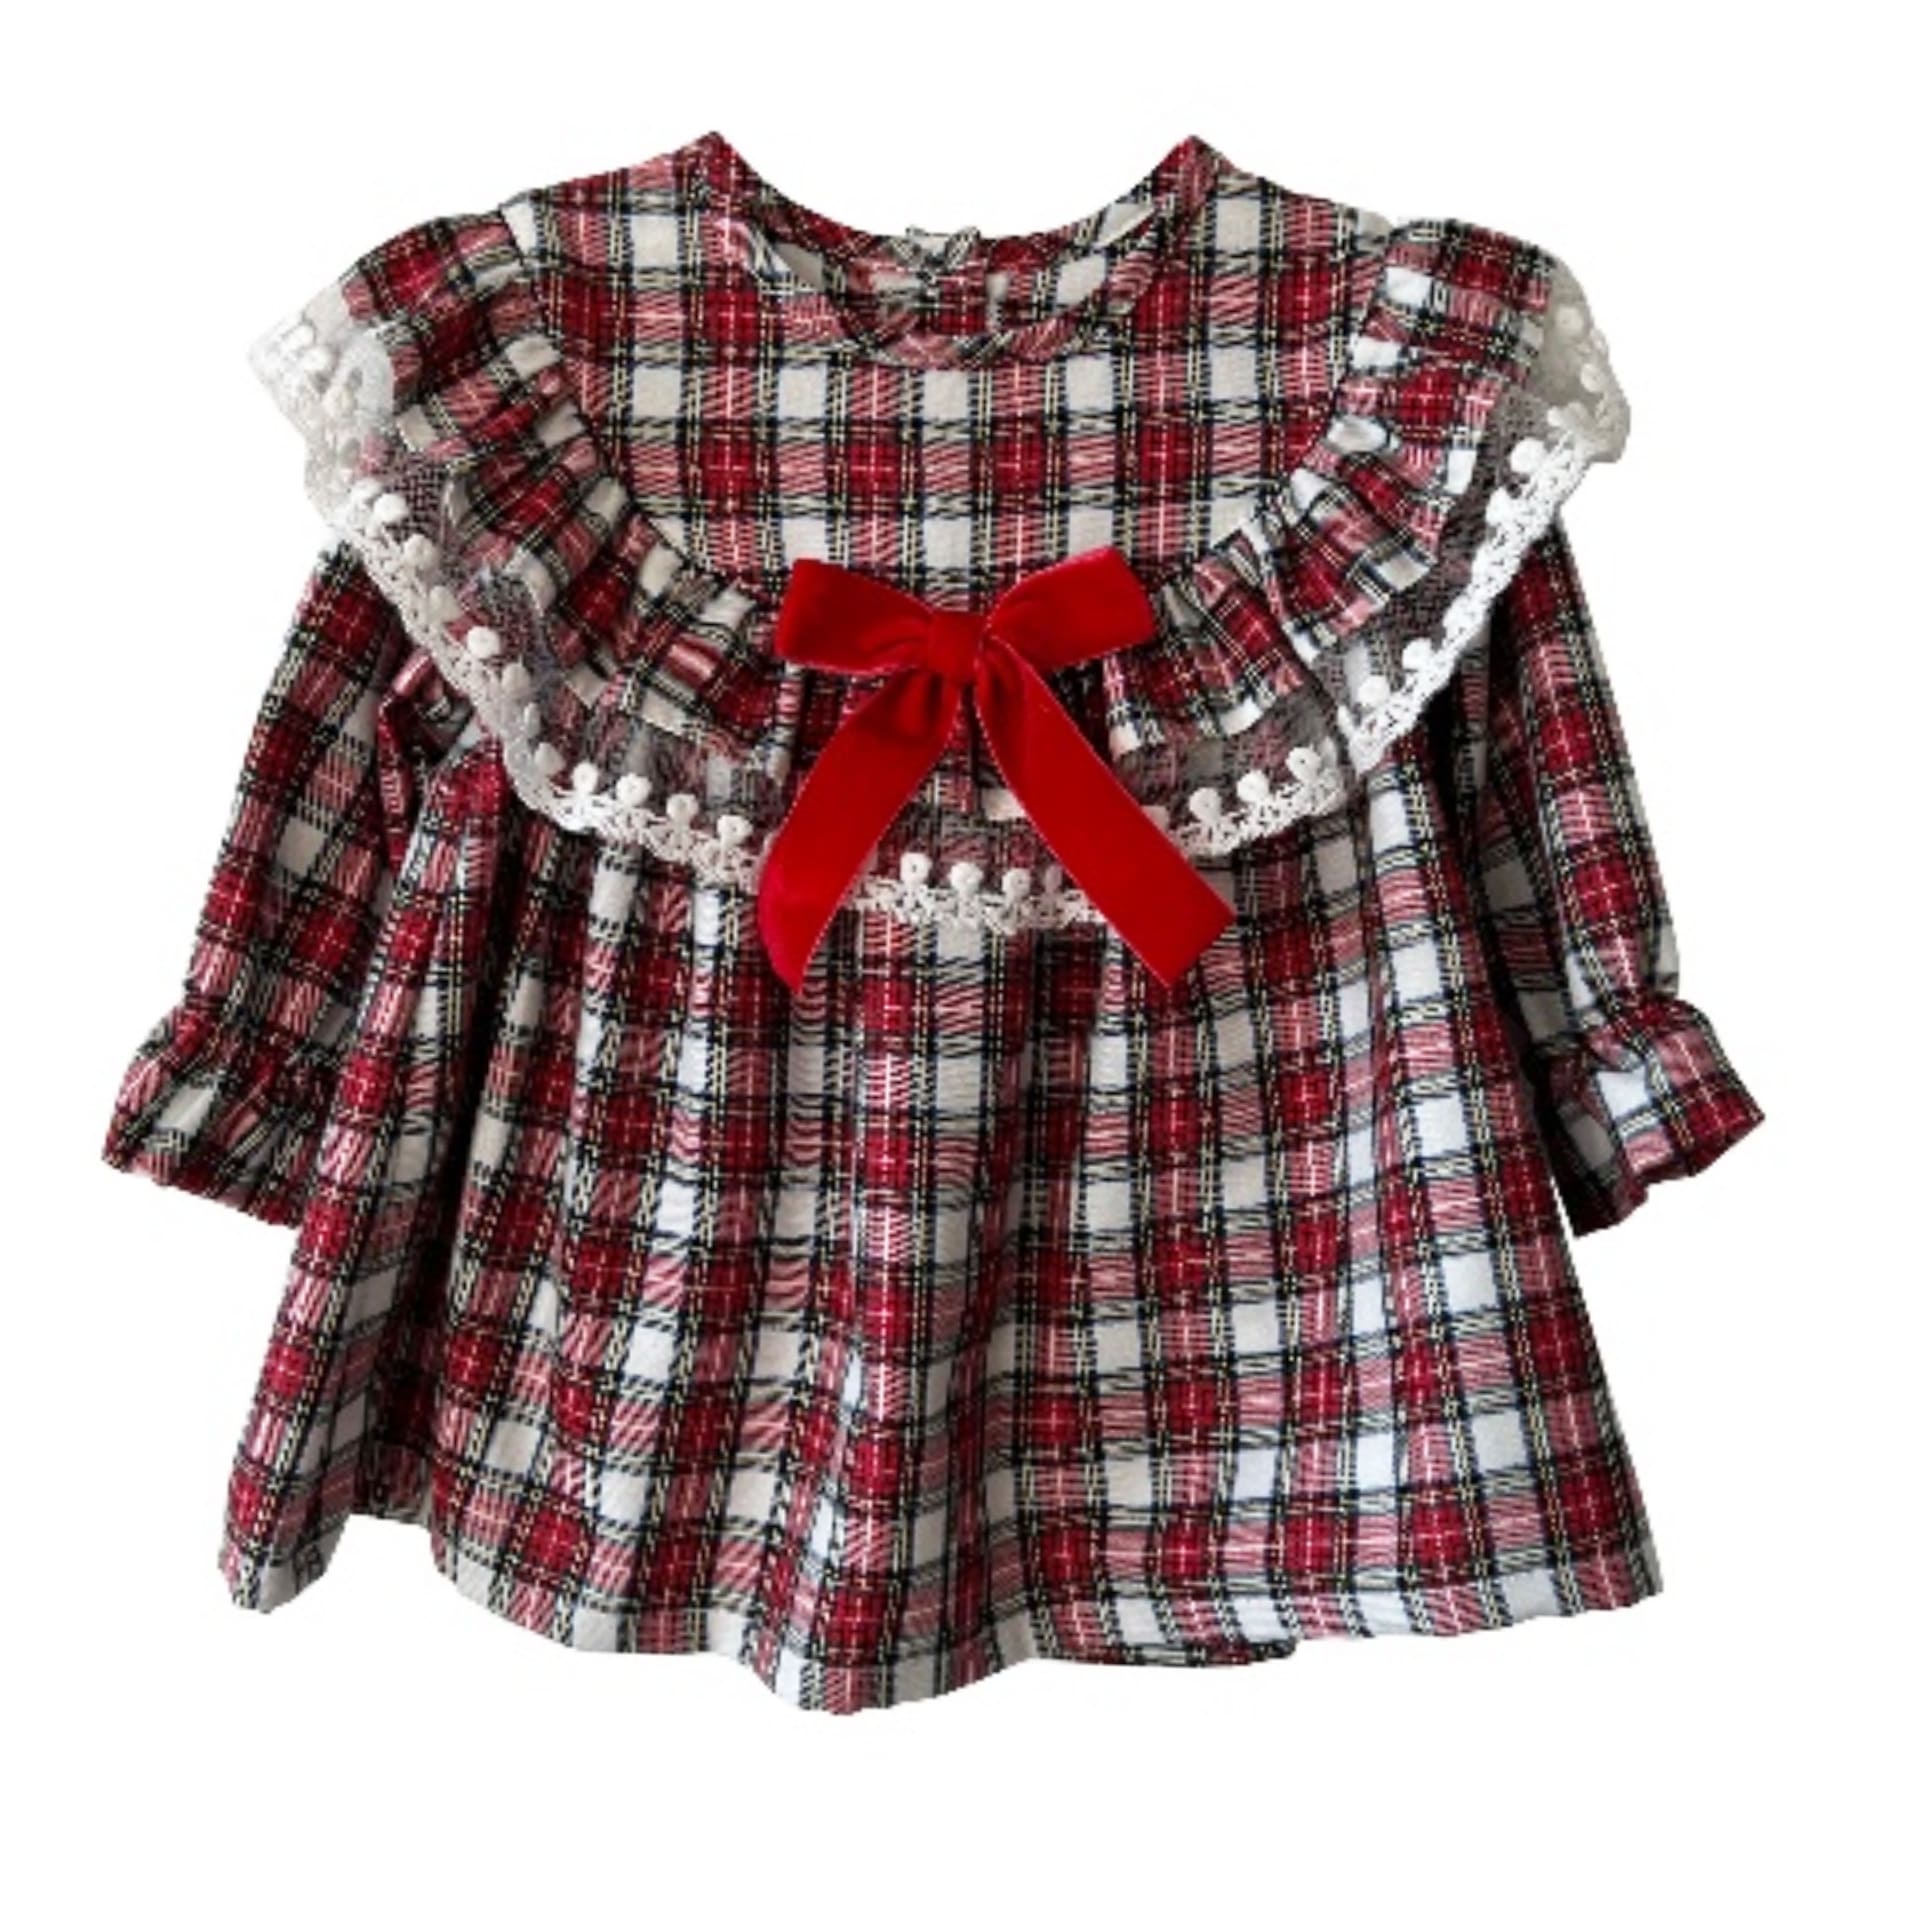 Ivory and red tartan frill blouse